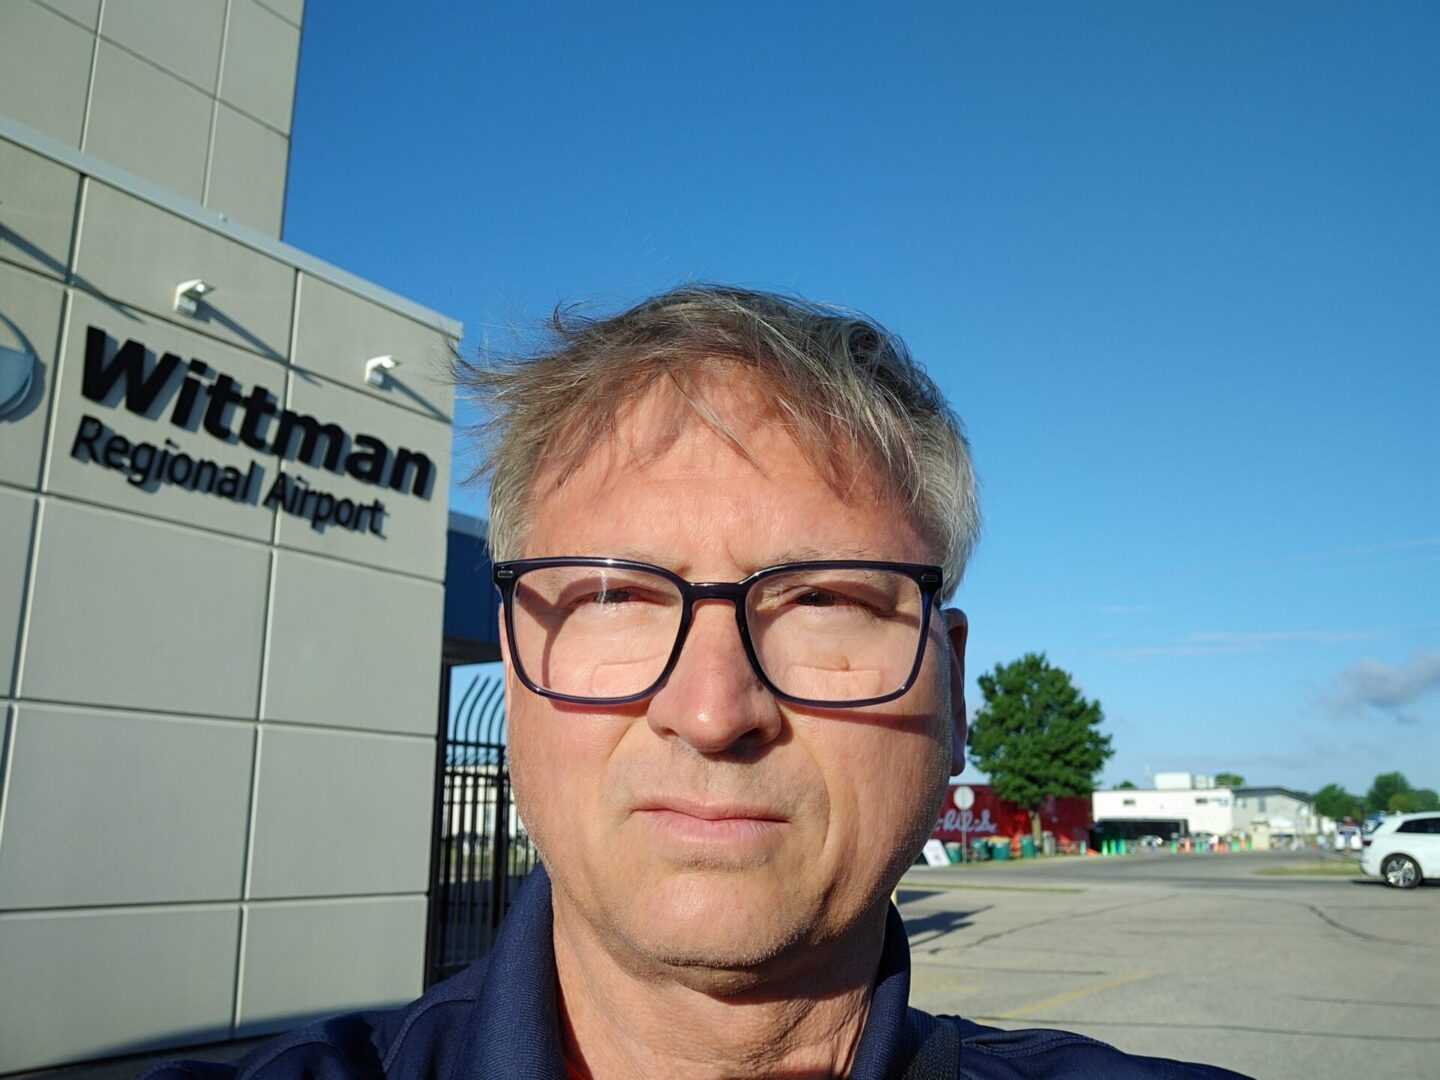 A man with glasses standing in front of an airport.